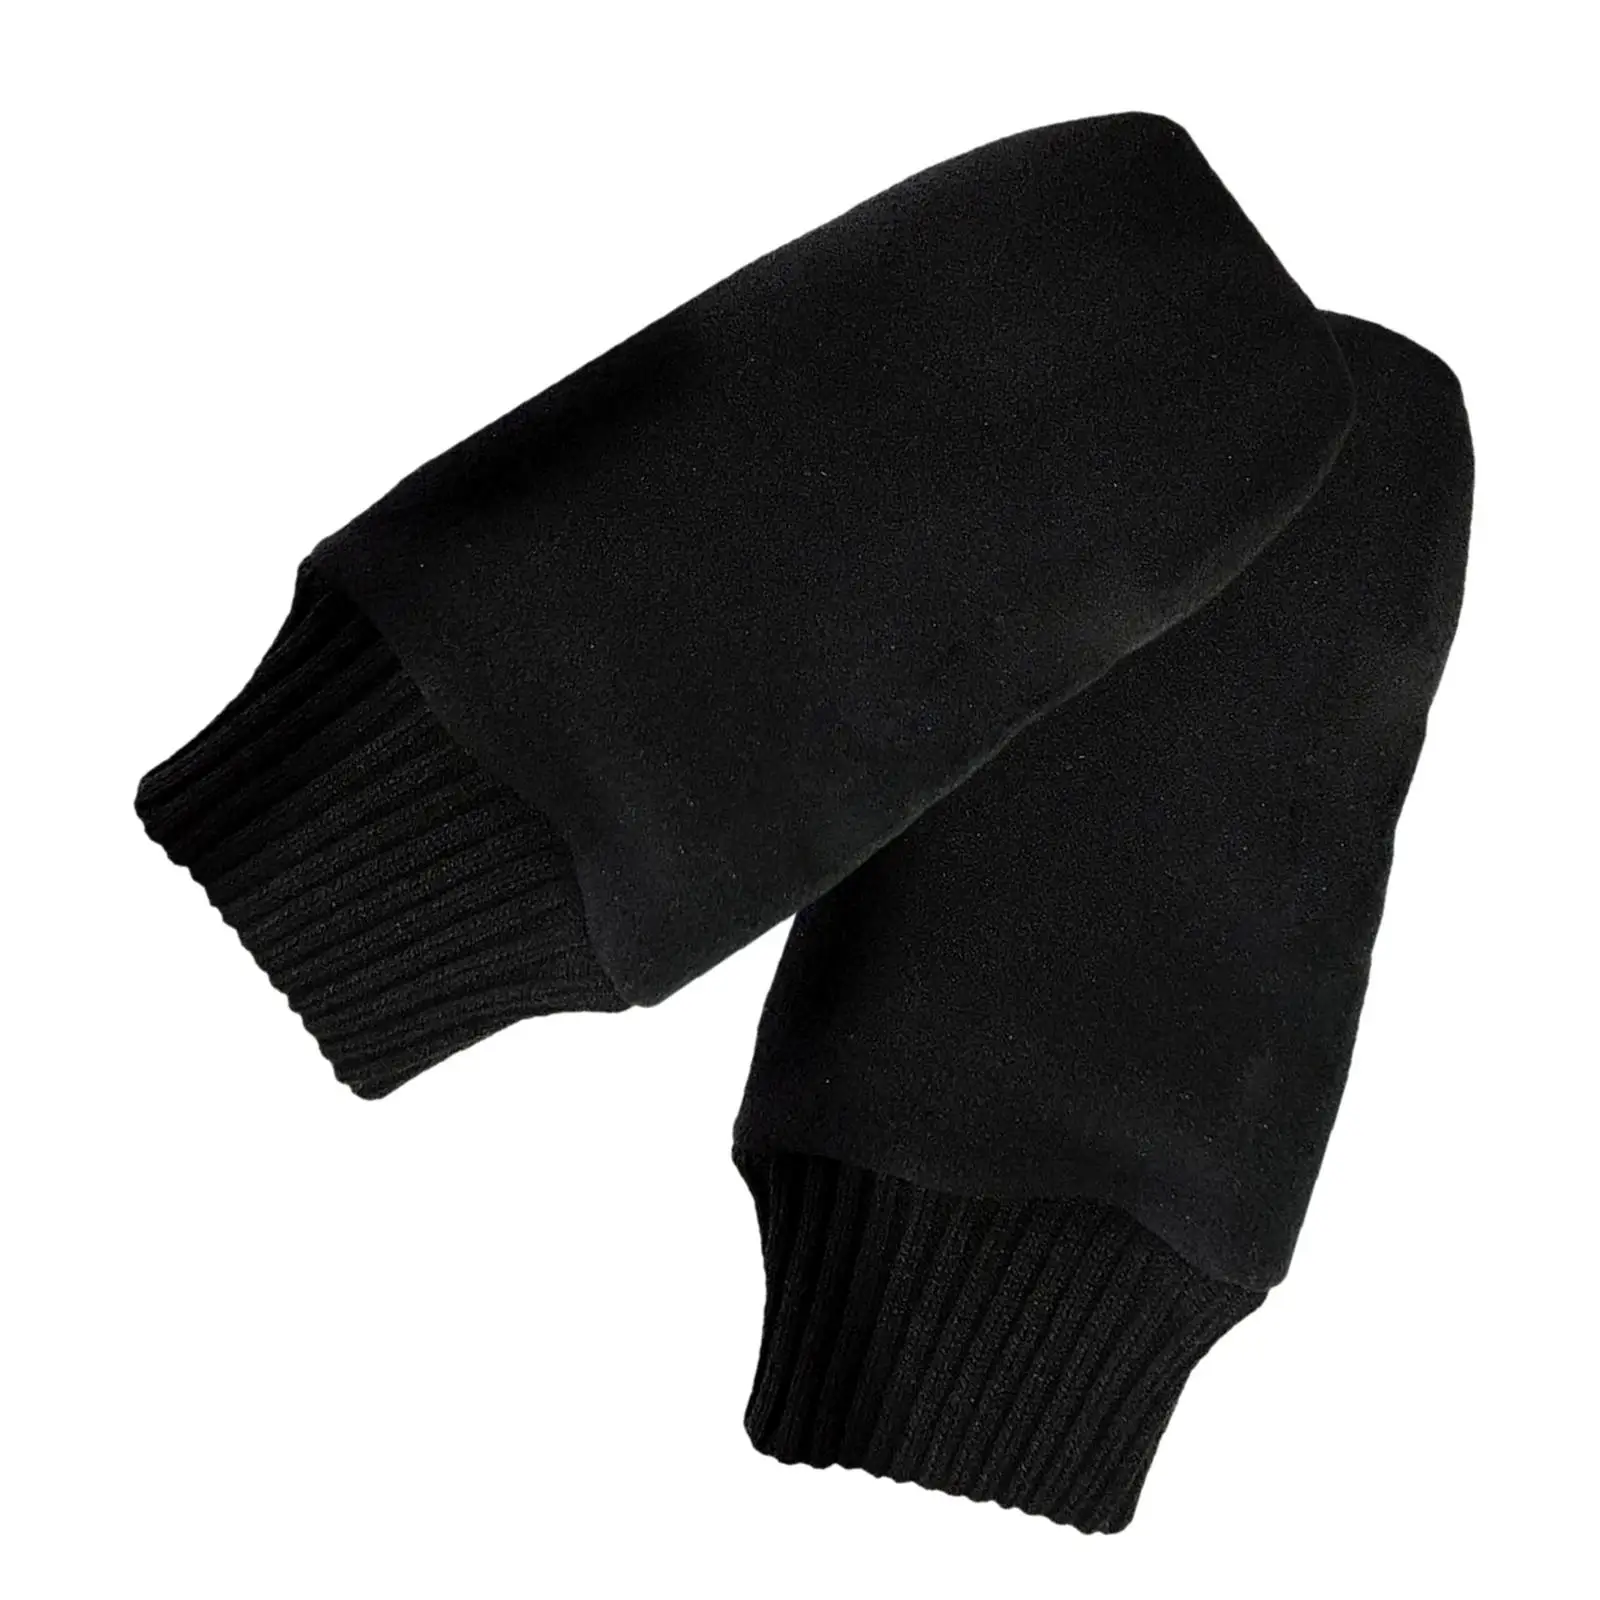 Dual Layer Golf Gloves Golf Equipment Soft Non Slip Easy to Wear Mitts Mitten Breathable Adjustable for Training Exercise Golfer